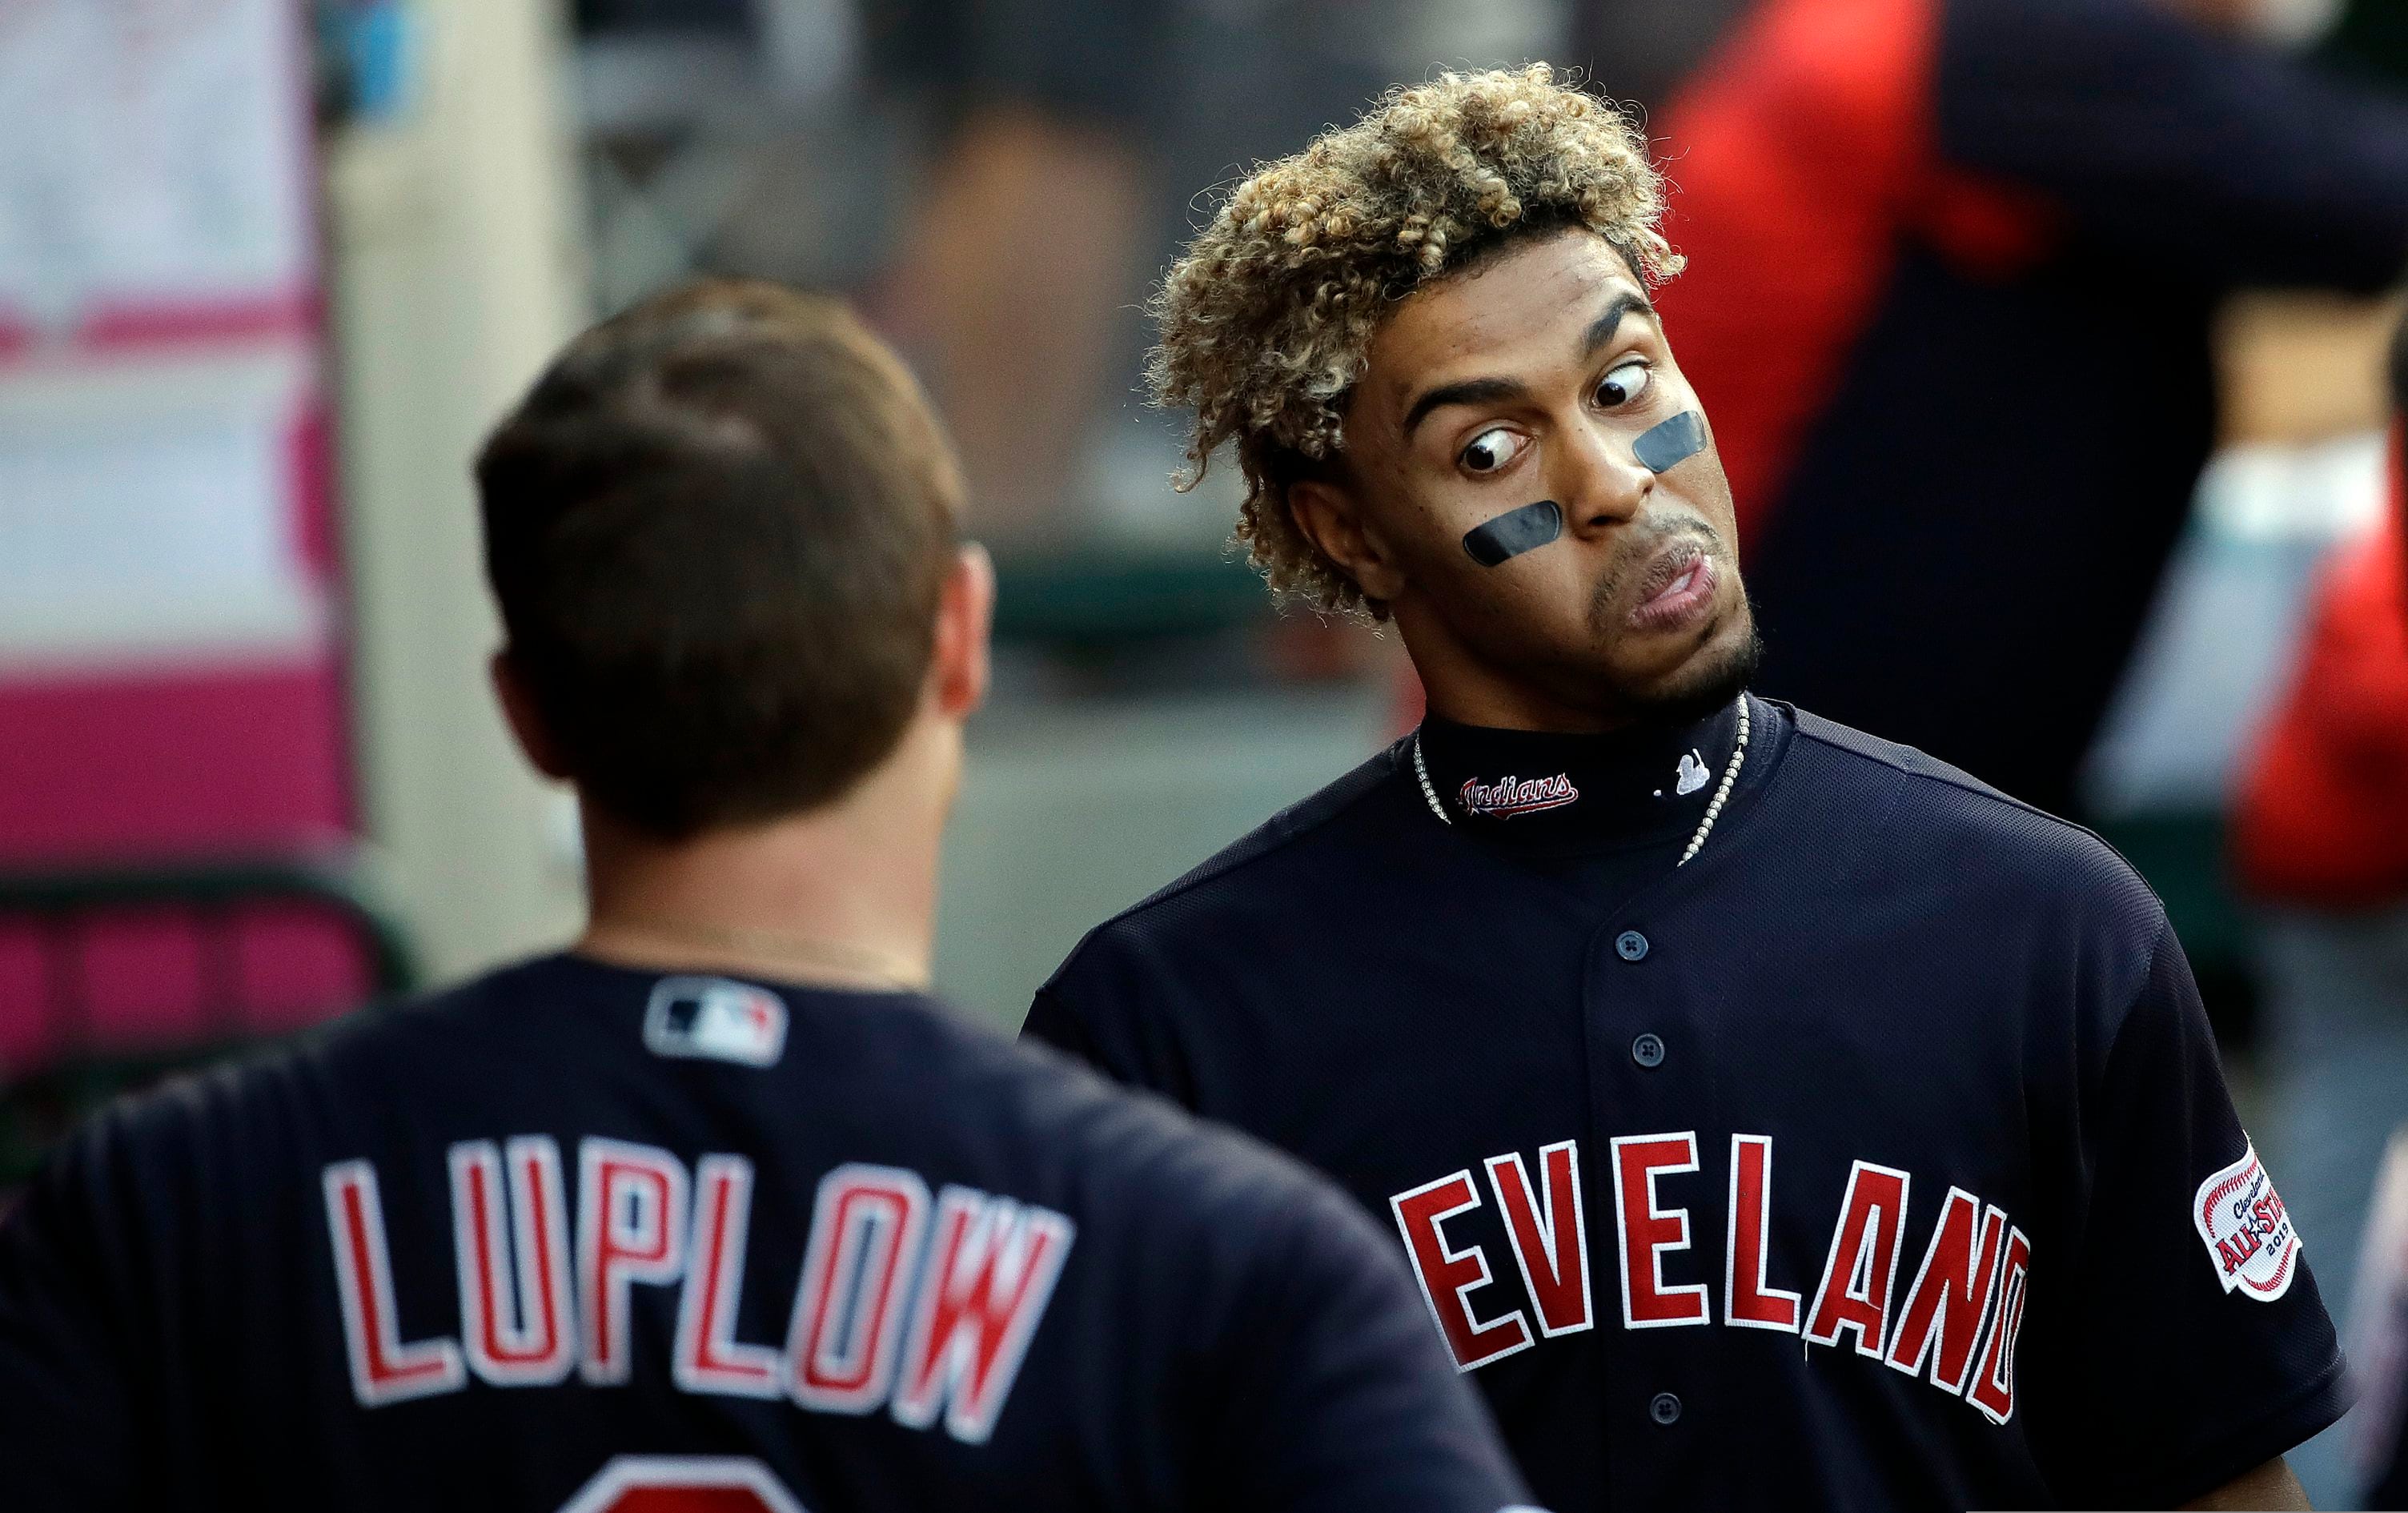 A photographer's perspective of Francisco Lindor as the Cleveland Indians'  team leader 